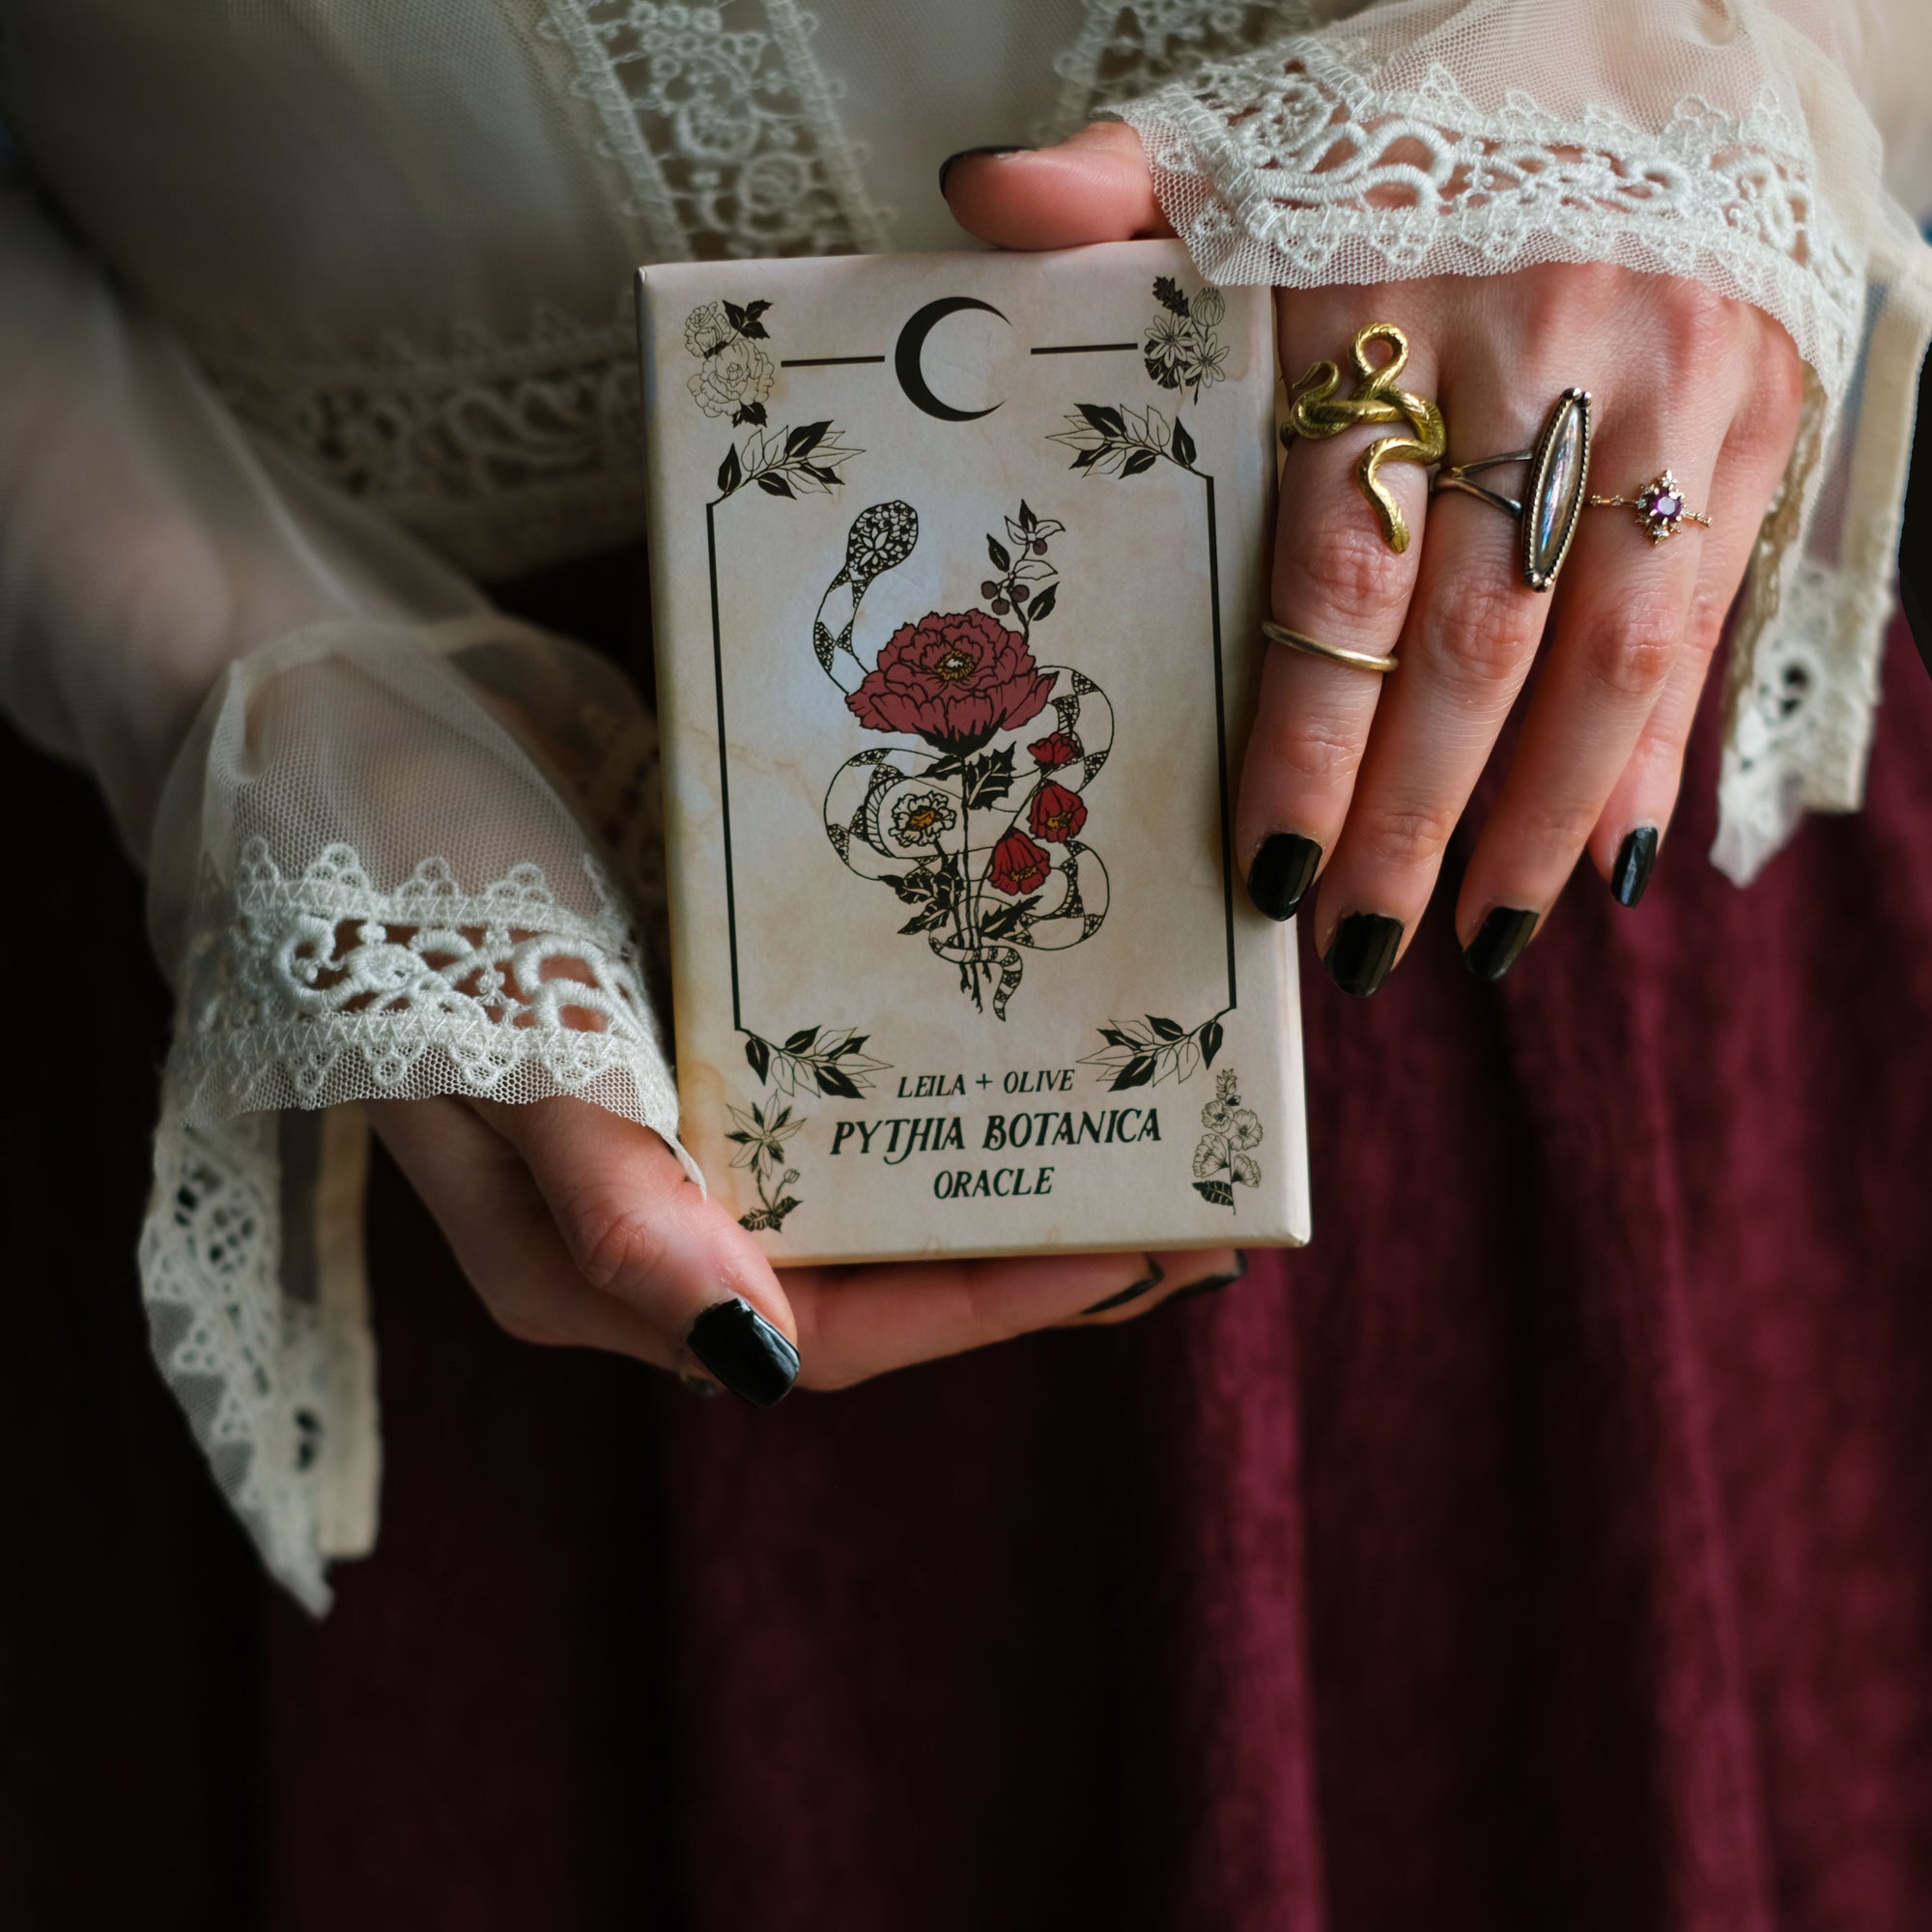 Botanical oracle deck rooted in mythology and infused with plant magic, Pythia Botanica Oracle. 
